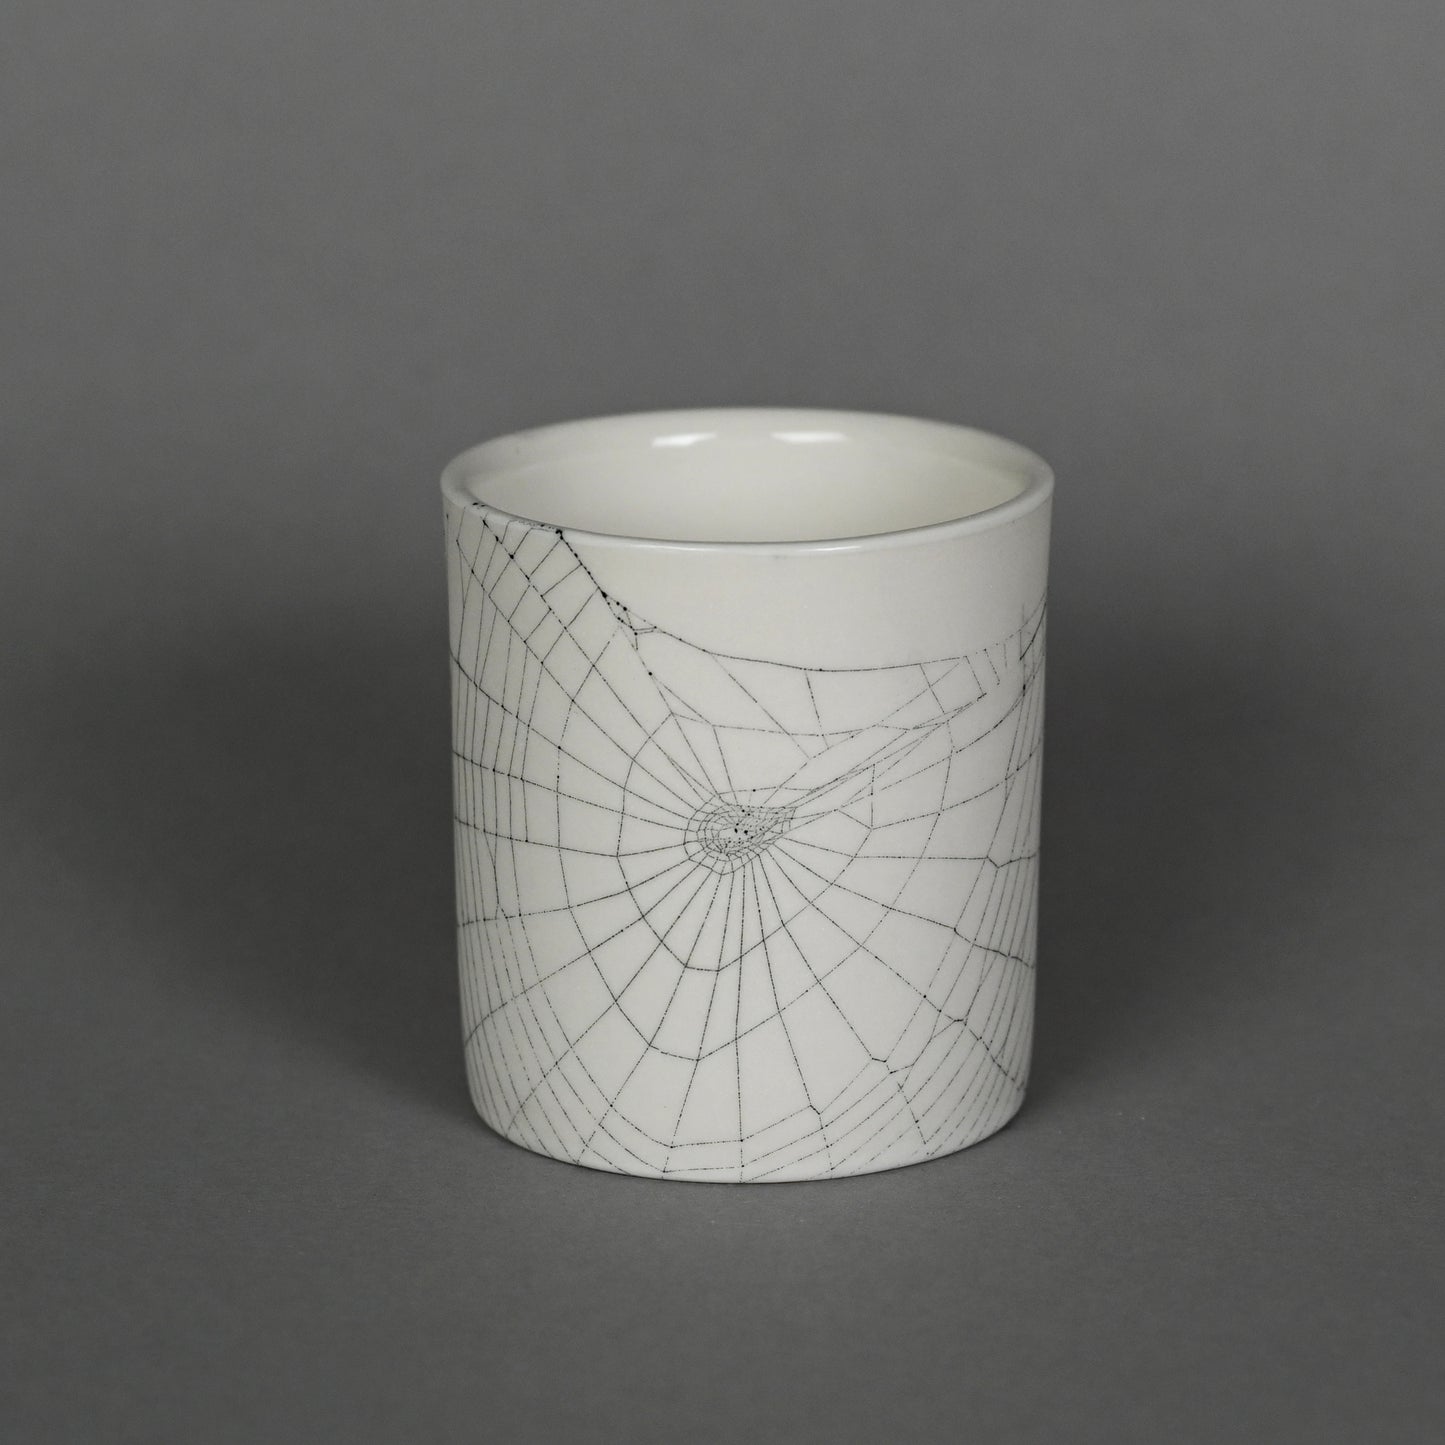 Web on Clay (219), Collected October 03, 2022